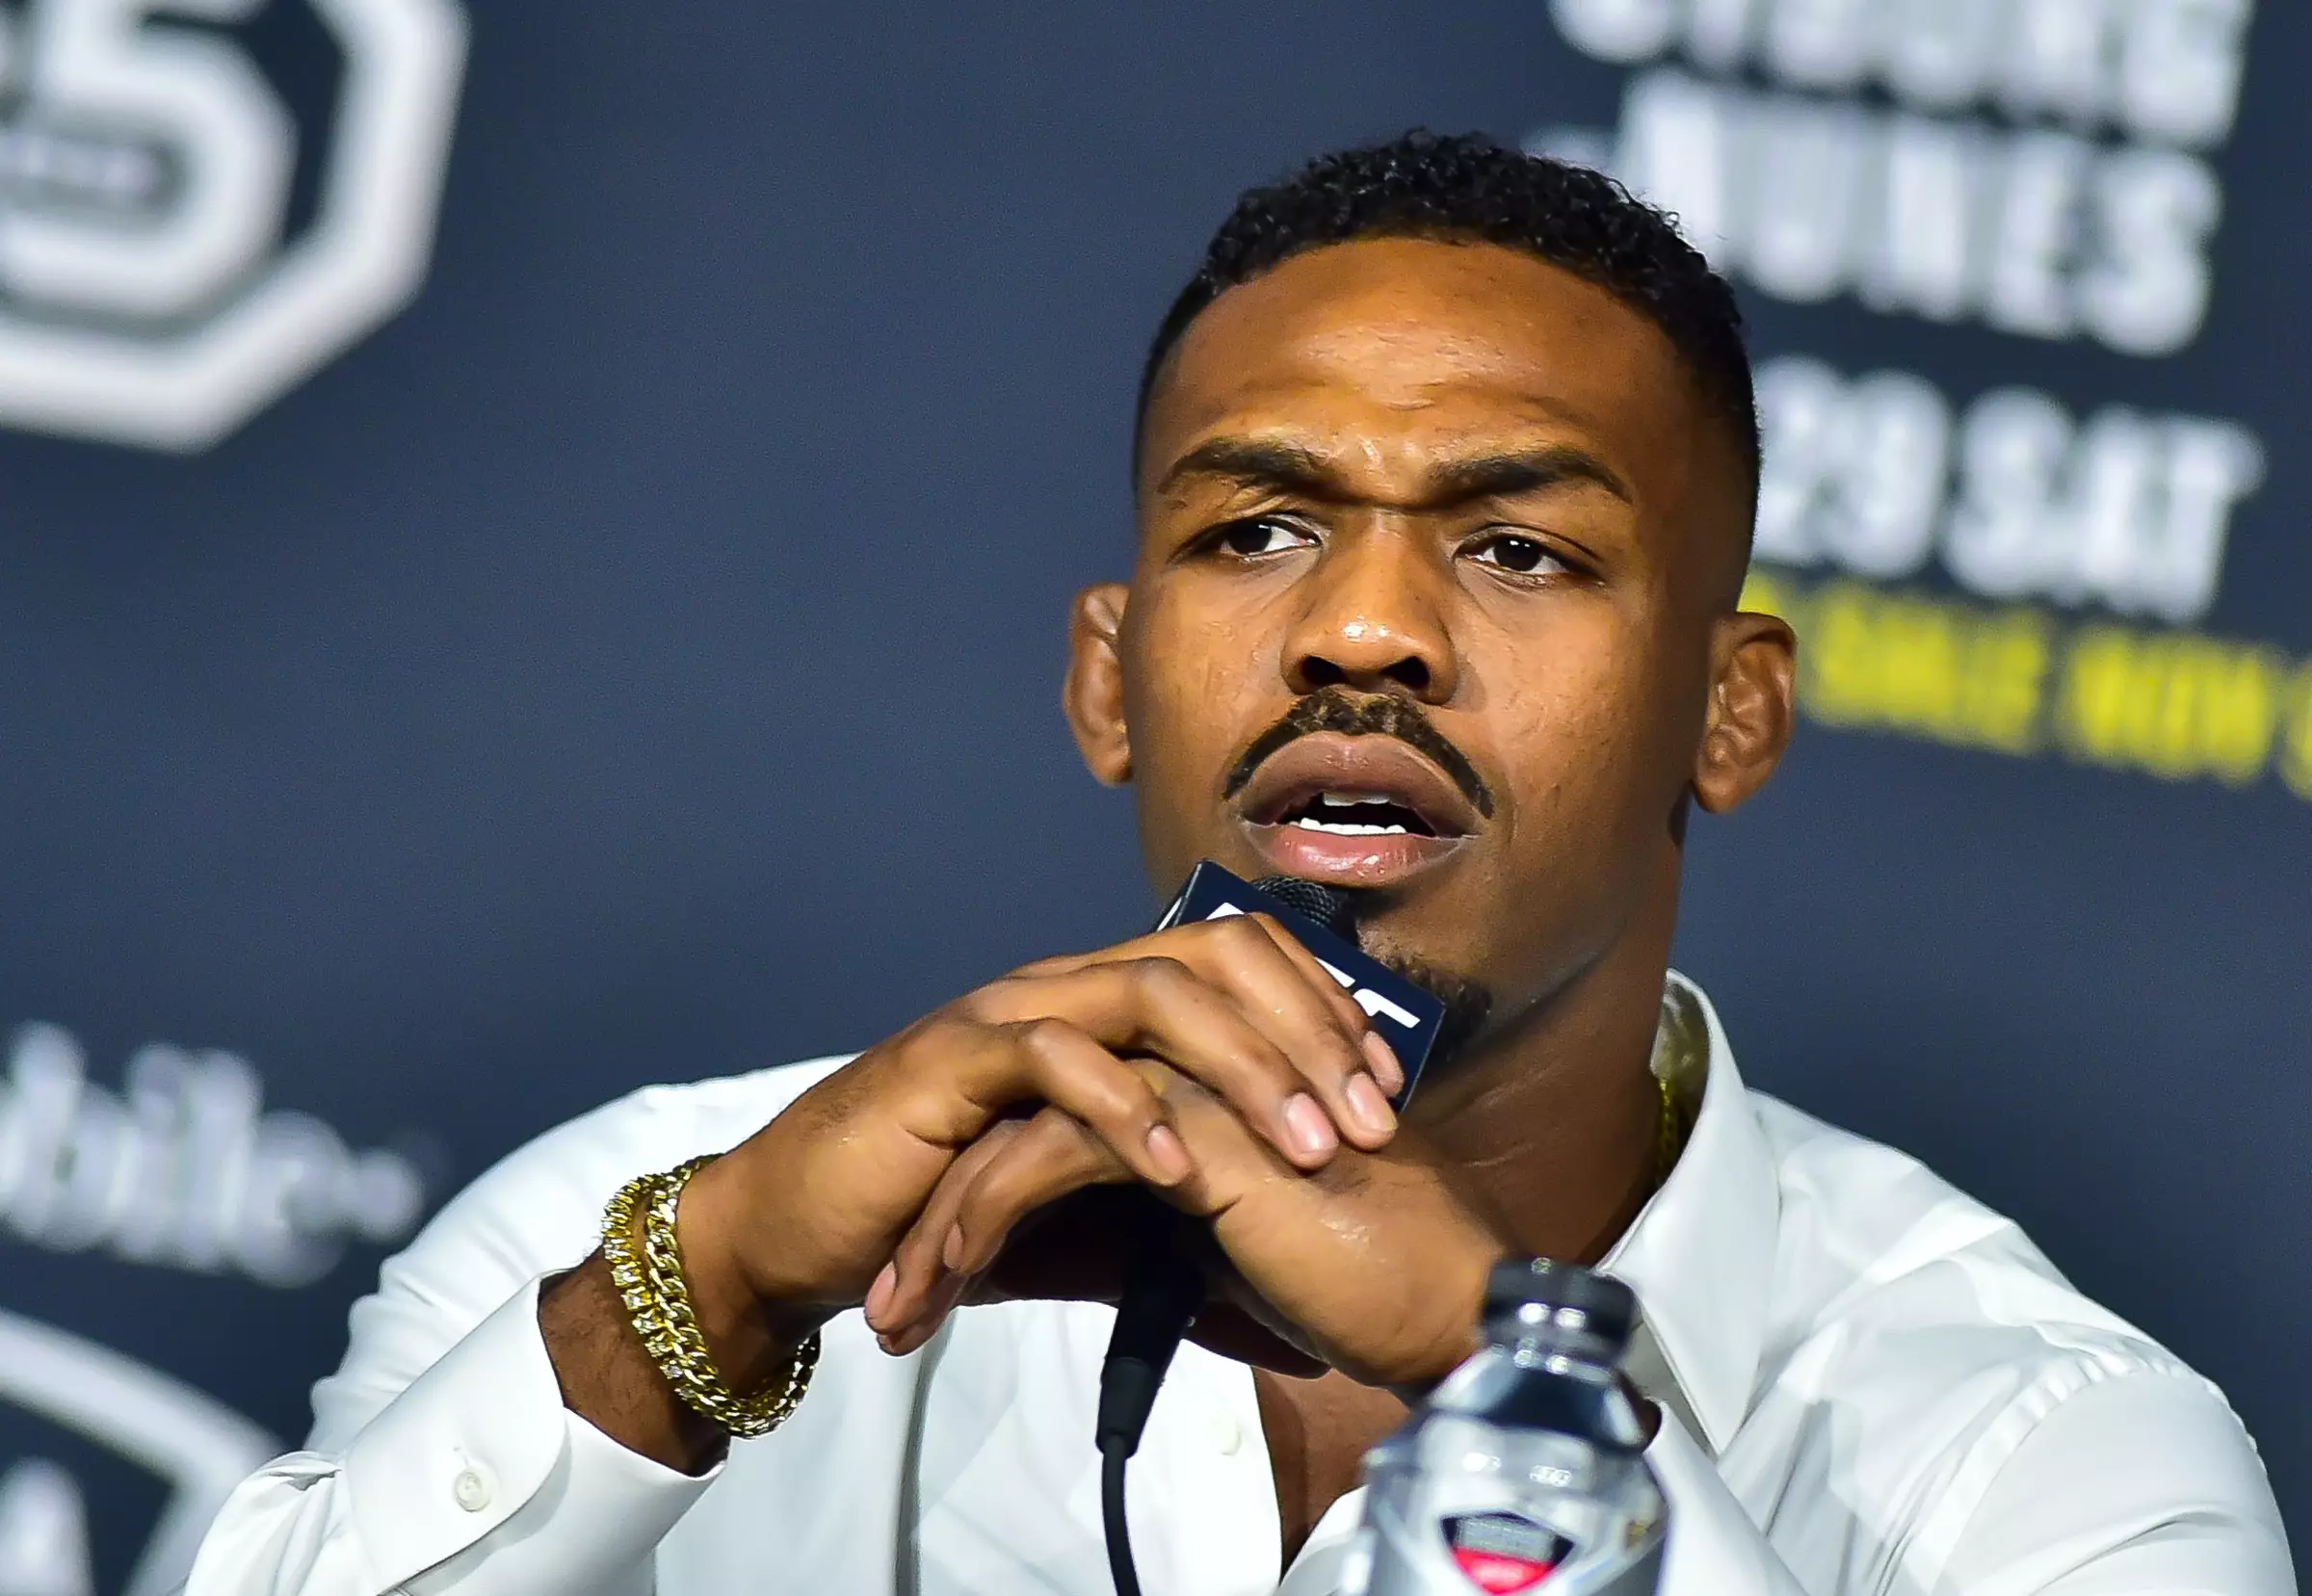 Jon Jones is predicted to have another big year in 2020